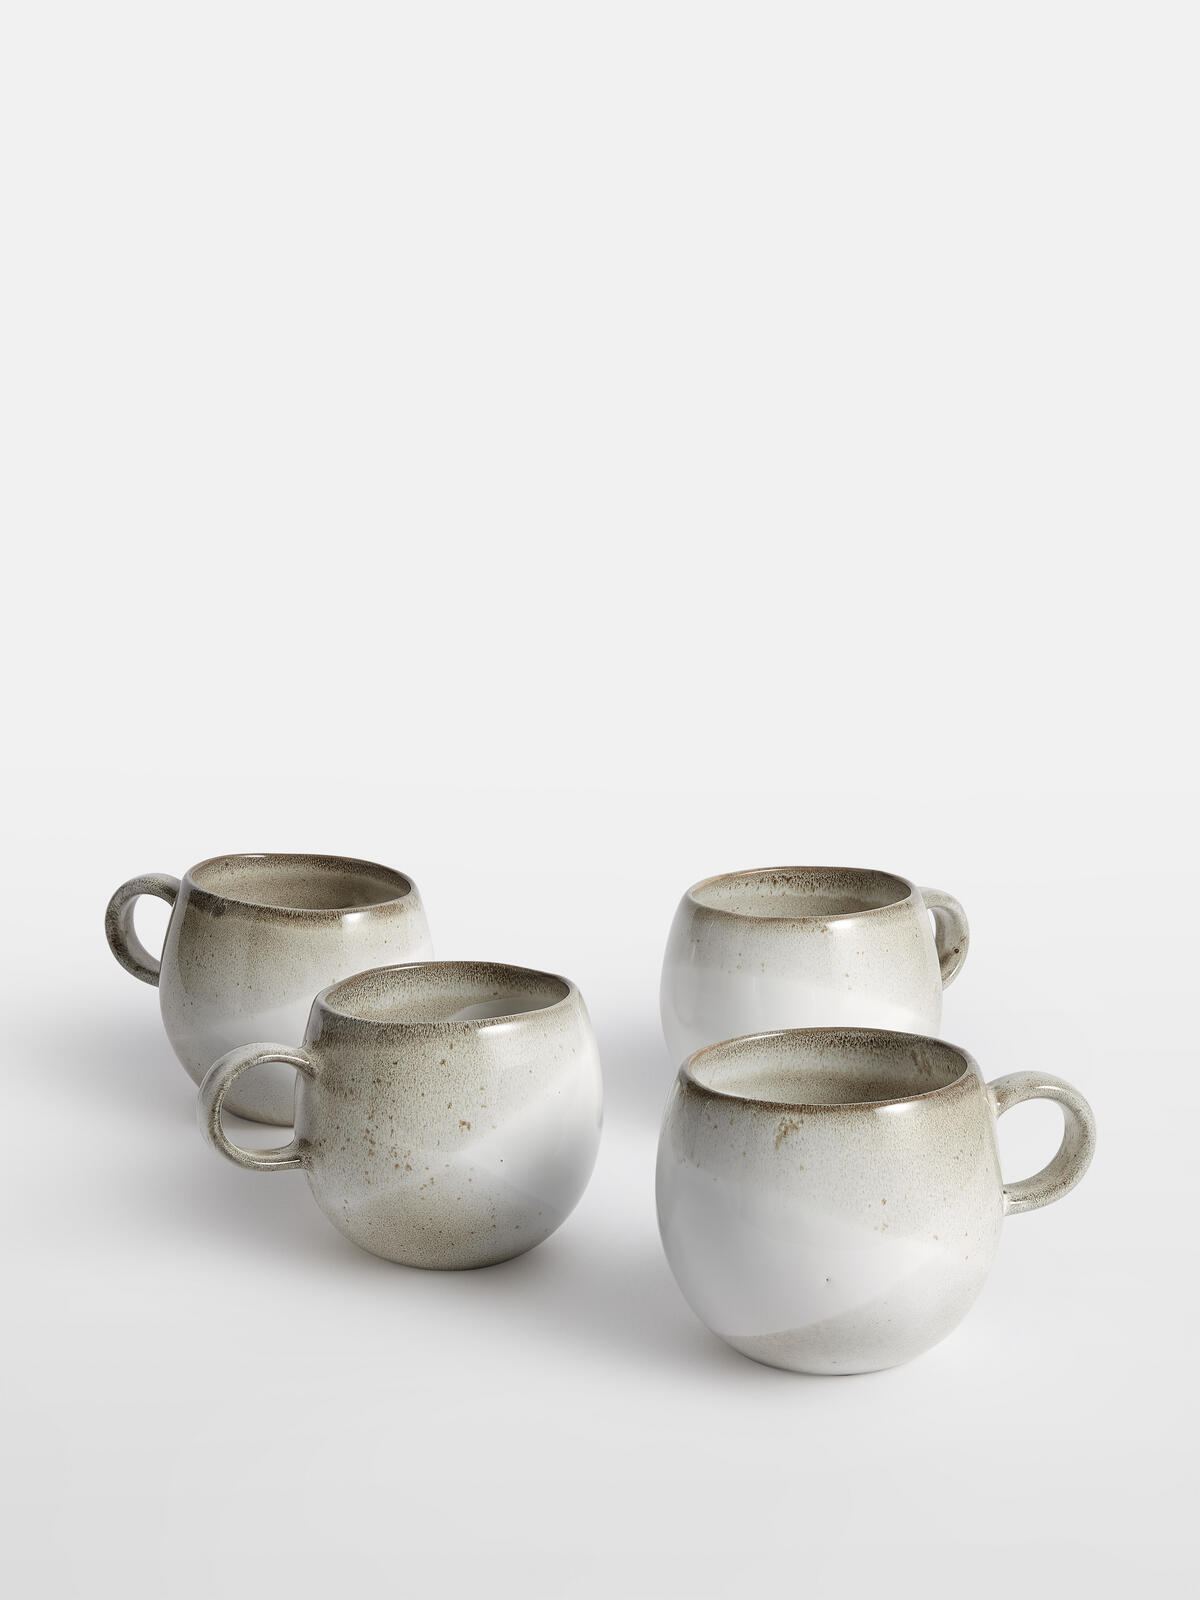 Soho Home Set of Four 'Evora' Portuguese Stoneware Mugs in Earthy and Neutral Colour Palettes